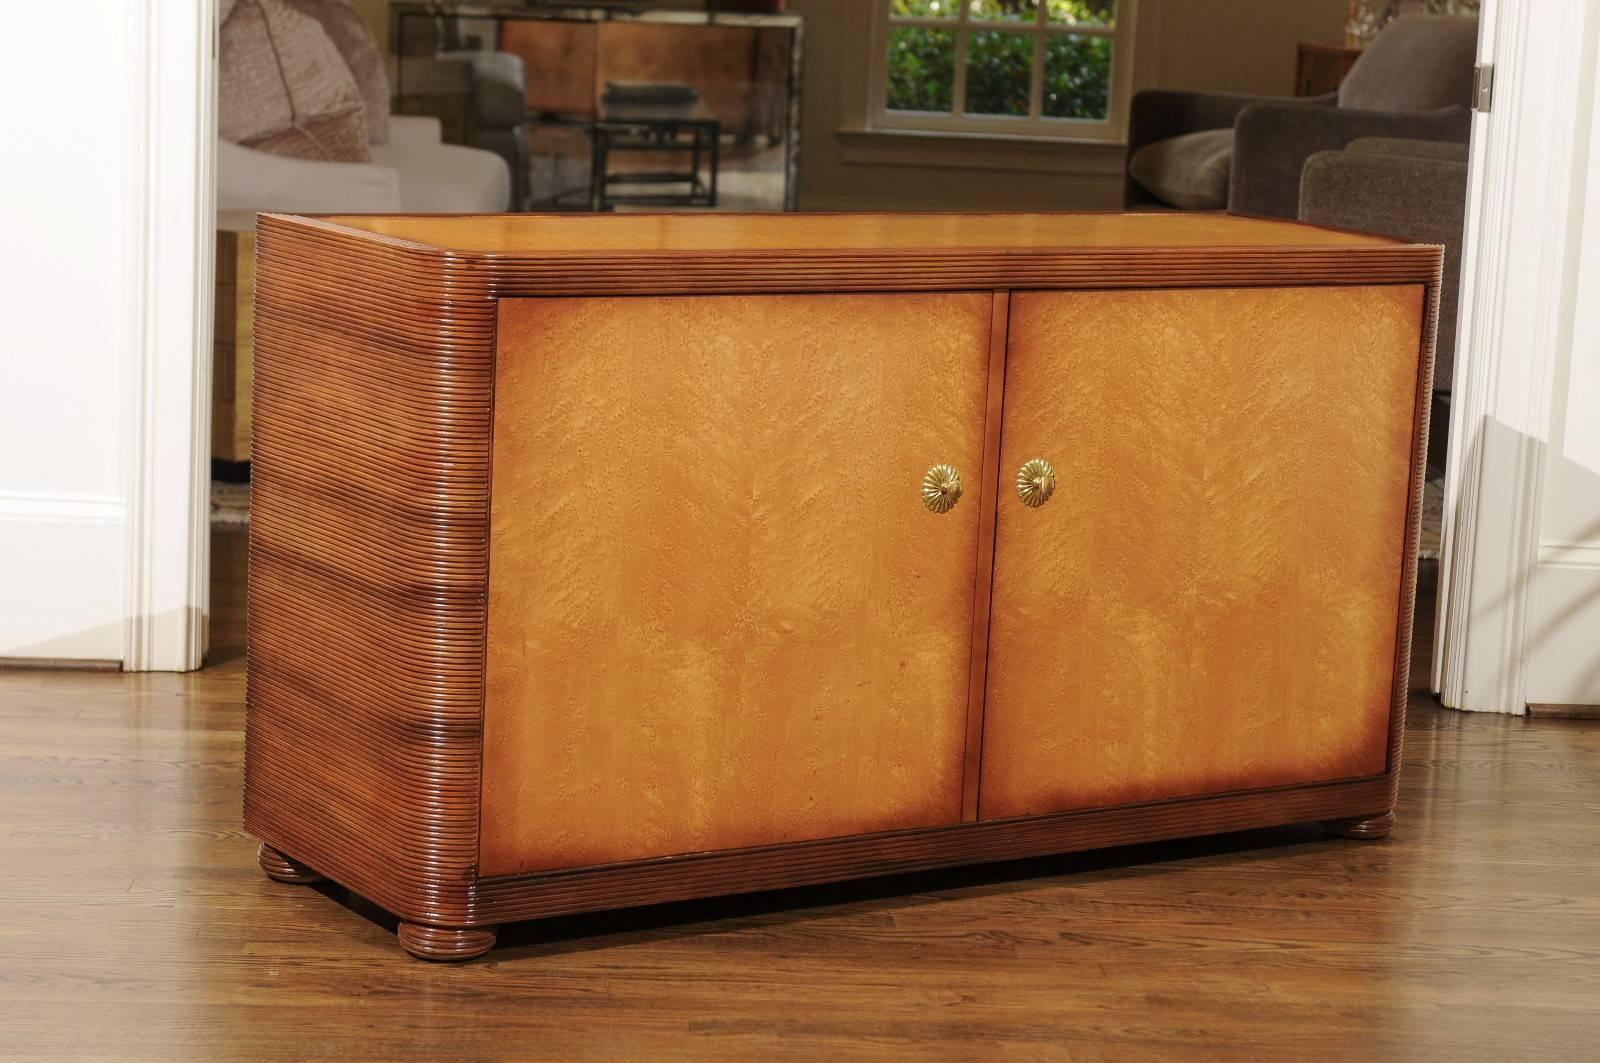 A stunning, unique restored cabinet by Baker Furniture, circa 1980. Expertly constructed reed bamboo case construction with doors, top and back veneered in bookmatched Birdseye Maple. Custom butter-burst lacquer finish in the style occasionally